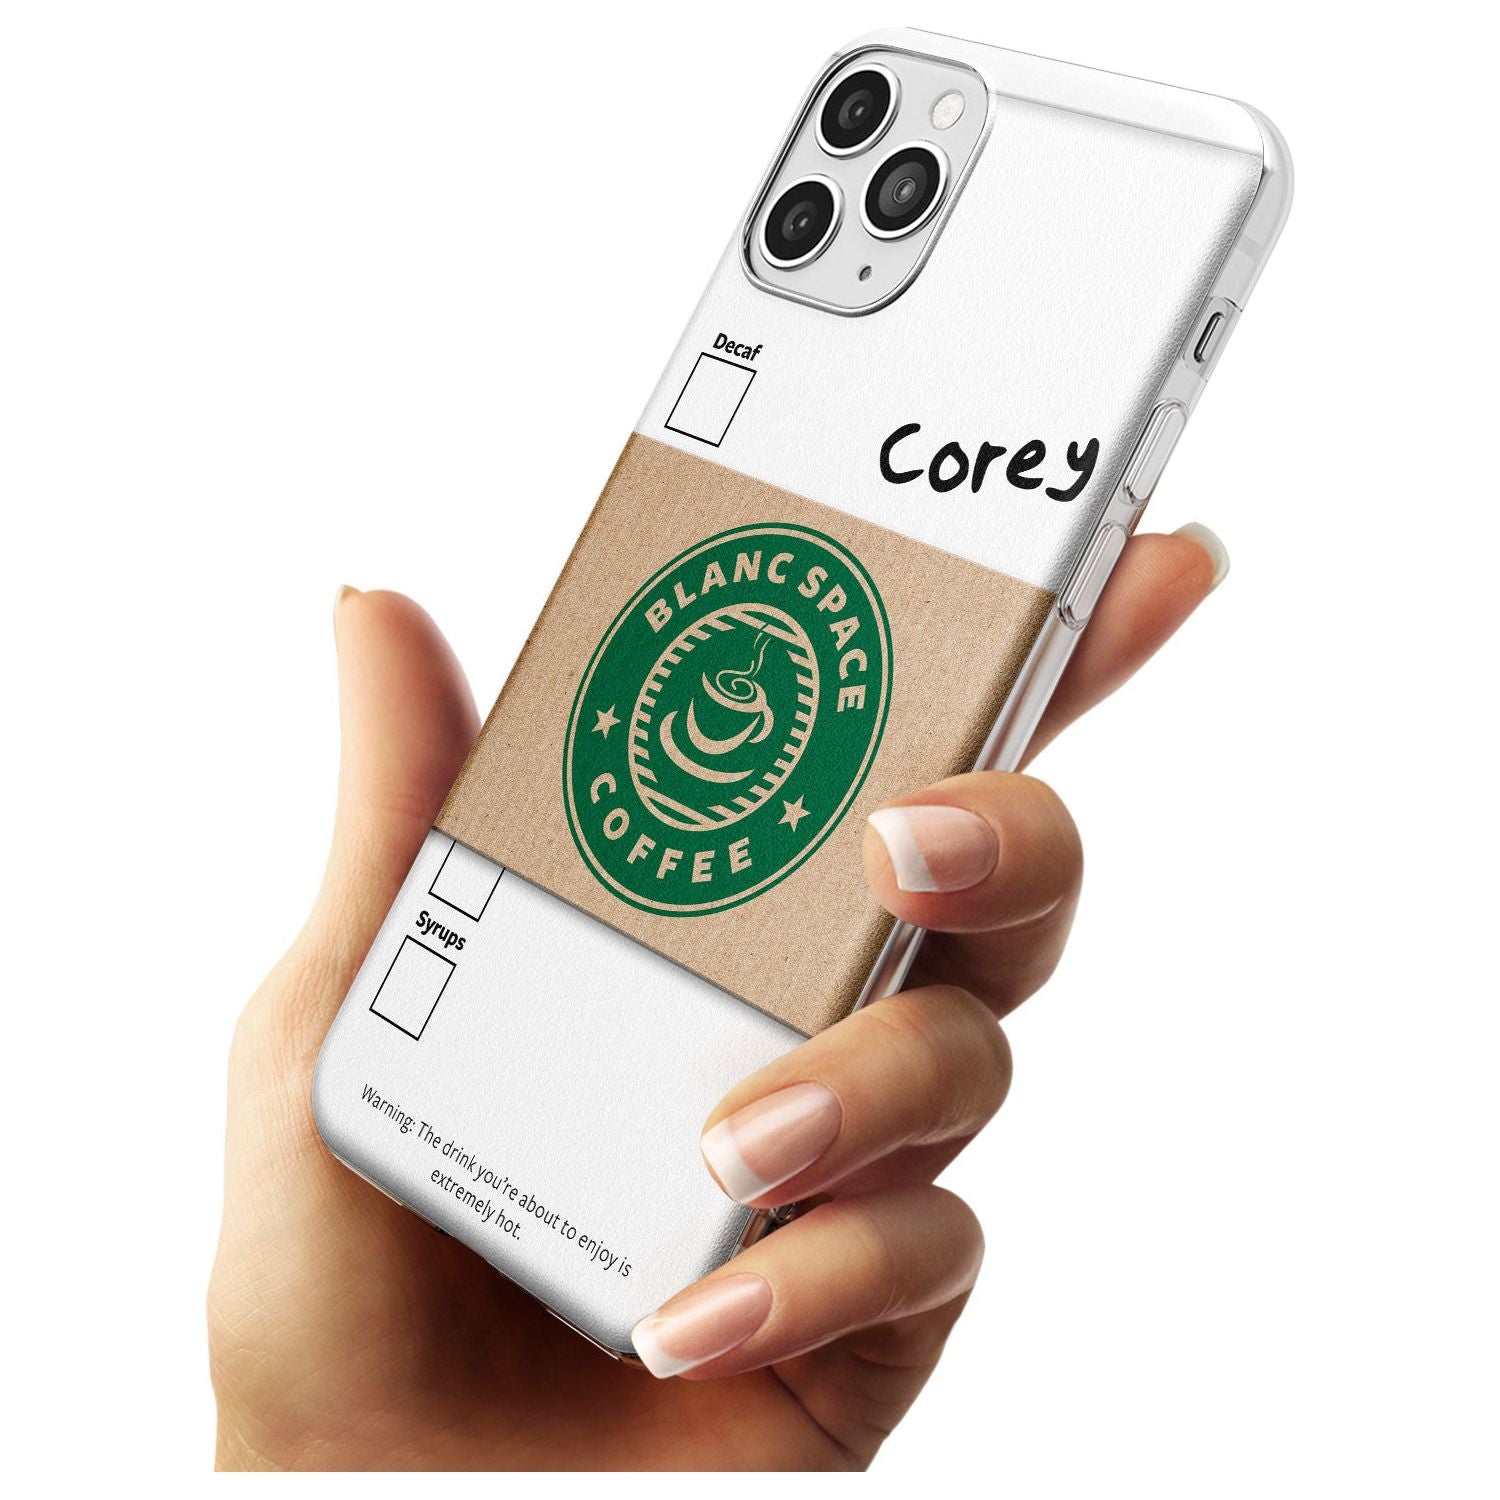 Personalised Coffee Cup Slim TPU Phone Case for iPhone 11 Pro Max